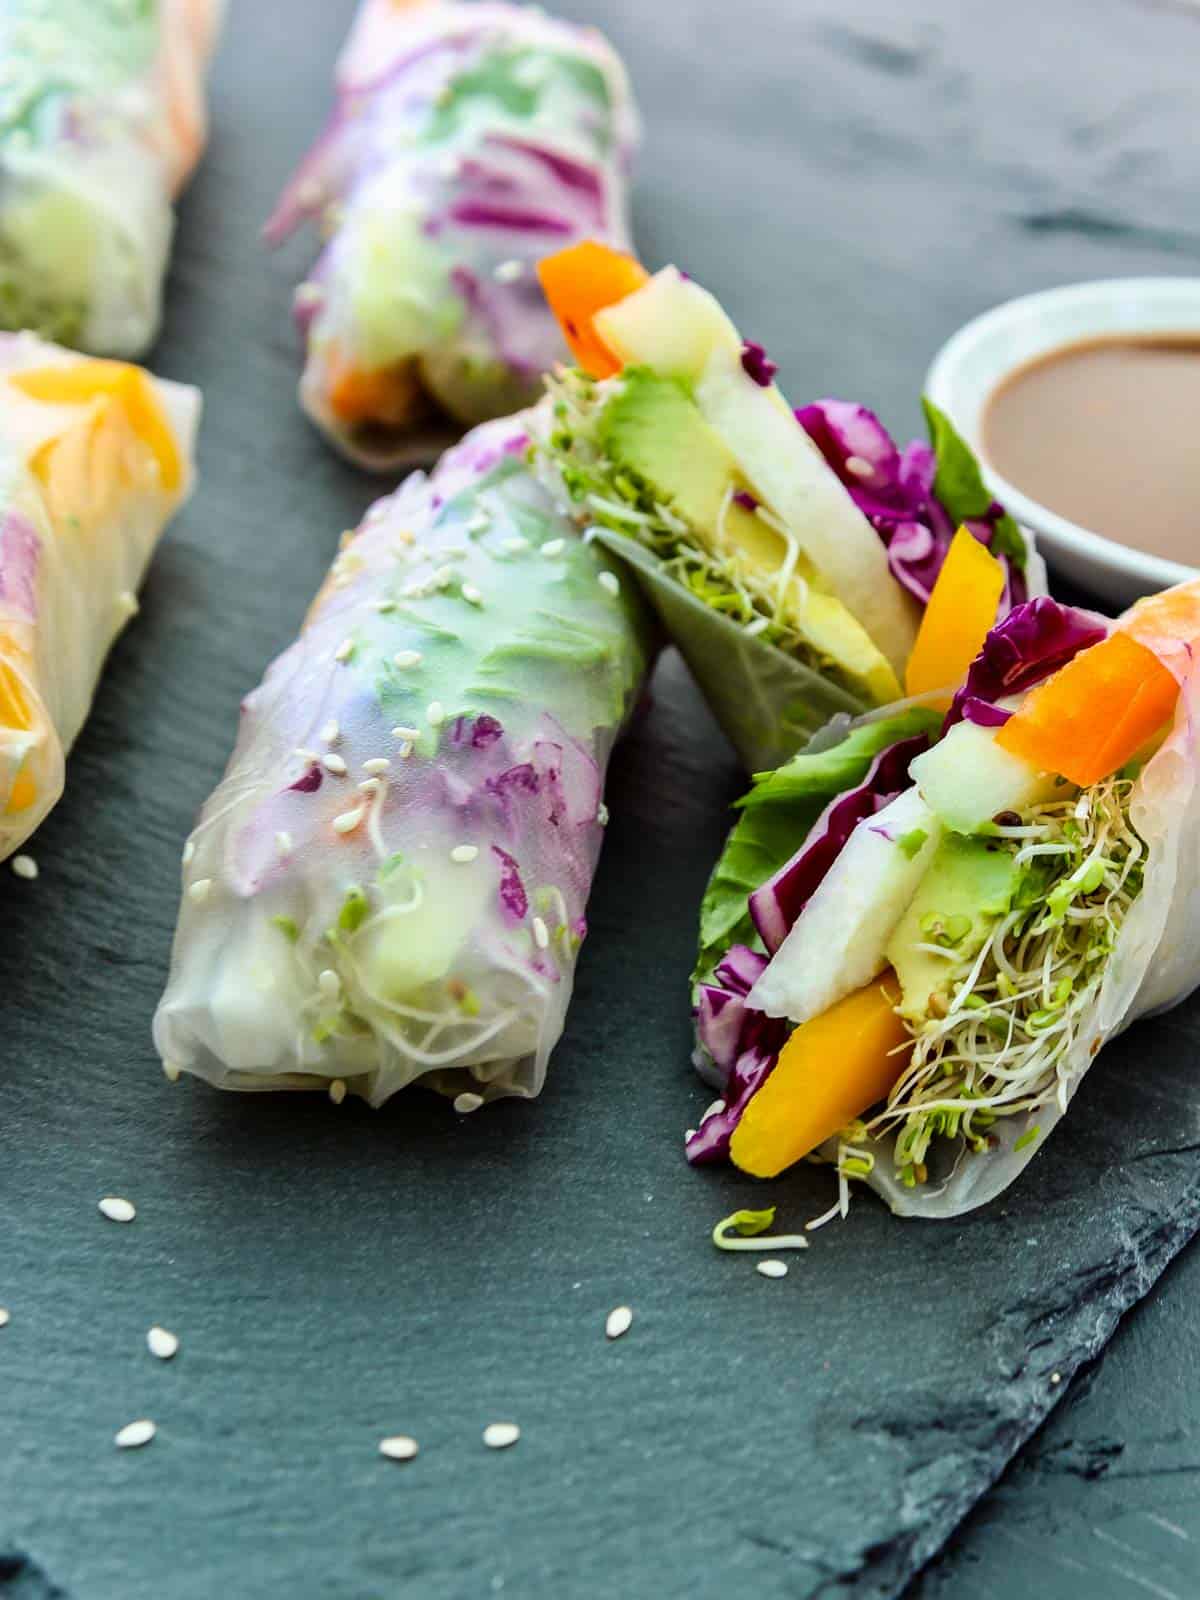 A close up of a A sliced open spring roll made with rice paper wrapper stuffed with colorful veggies.